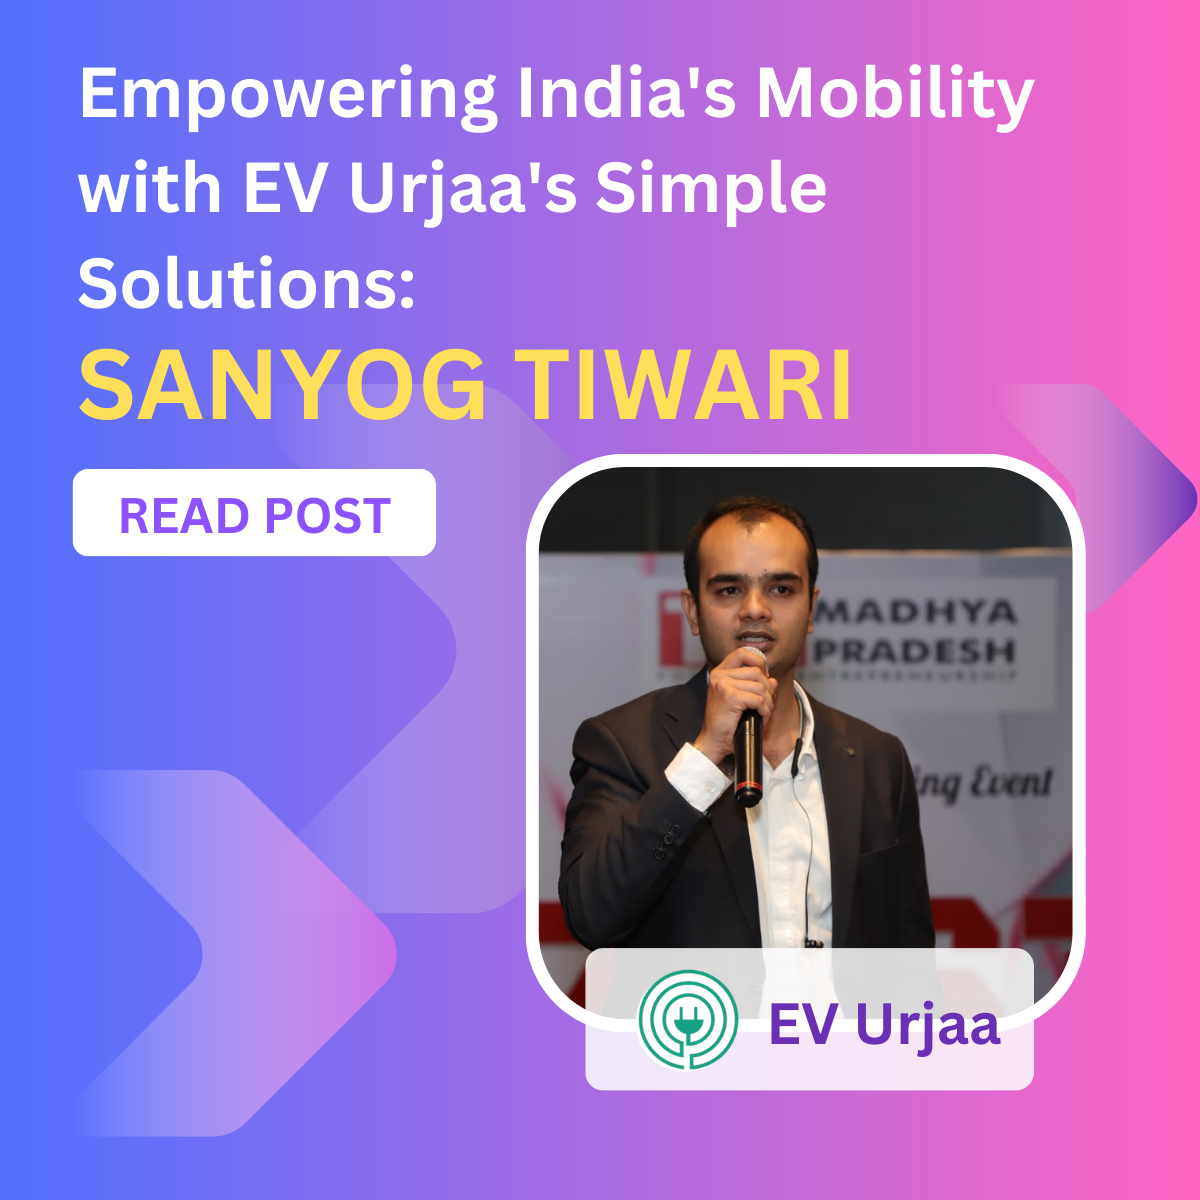 Empowering India's Mobility with EV Urjaa's Simple Solutions